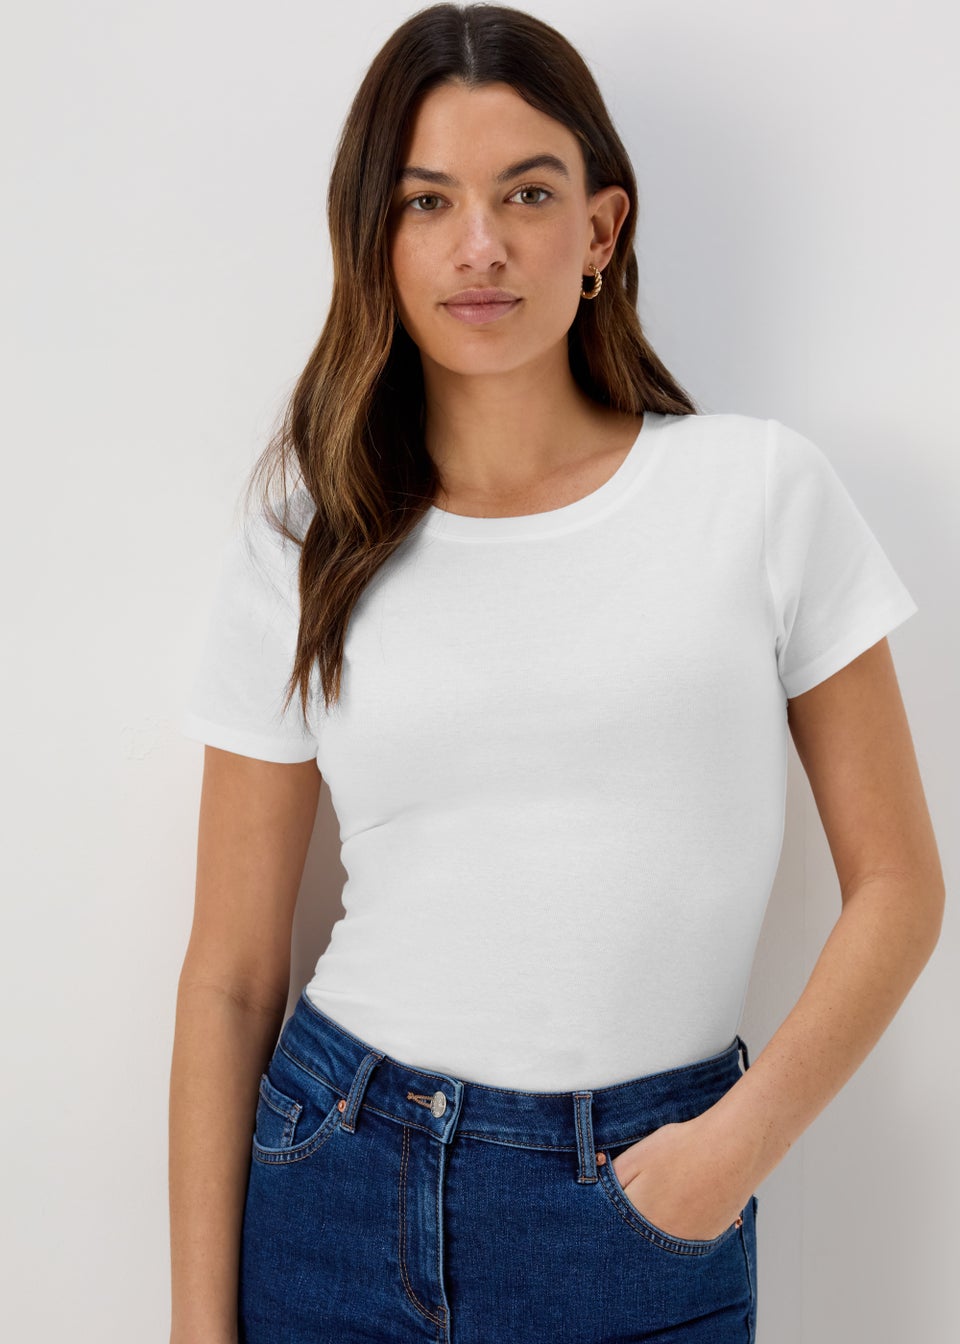  3/4 Sleeve Tees for Women, Workout Shirts for Women, Women's  3/4 Sleeve Tops, Teacher Shirts for Women, Women's 3/4 Sleeve T Shirts, Cute  Tops for Women Trendy Going Out(White,Large) : Clothing